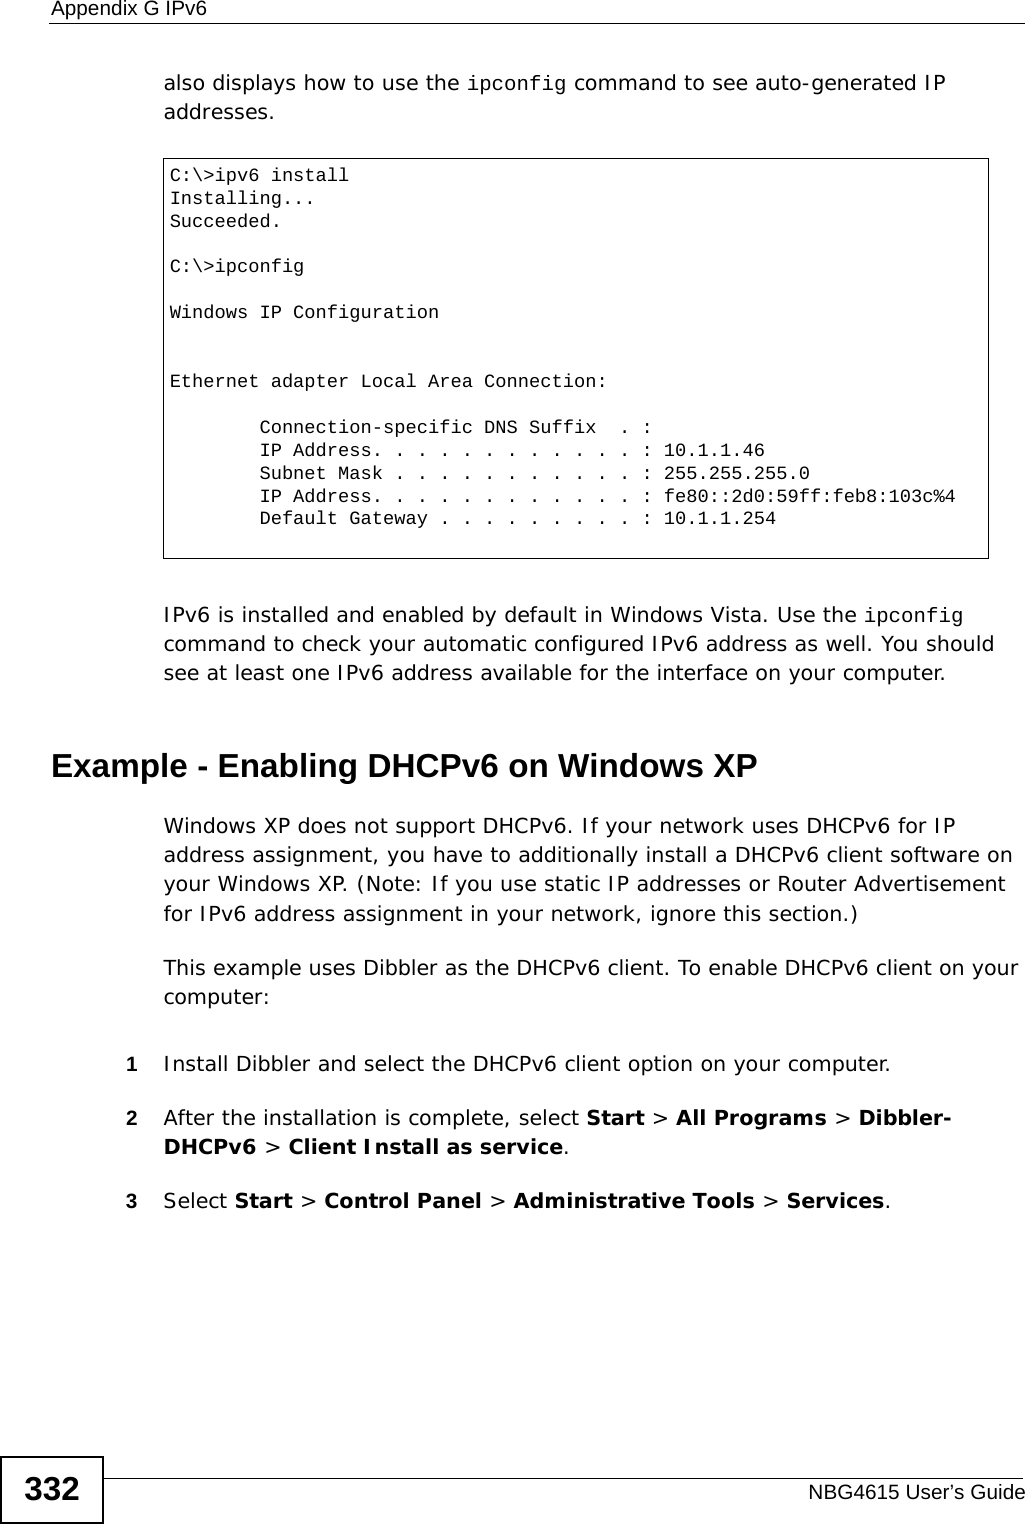 Appendix G IPv6NBG4615 User’s Guide332also displays how to use the ipconfig command to see auto-generated IP addresses.IPv6 is installed and enabled by default in Windows Vista. Use the ipconfig command to check your automatic configured IPv6 address as well. You should see at least one IPv6 address available for the interface on your computer.Example - Enabling DHCPv6 on Windows XPWindows XP does not support DHCPv6. If your network uses DHCPv6 for IP address assignment, you have to additionally install a DHCPv6 client software on your Windows XP. (Note: If you use static IP addresses or Router Advertisement for IPv6 address assignment in your network, ignore this section.)This example uses Dibbler as the DHCPv6 client. To enable DHCPv6 client on your computer:1Install Dibbler and select the DHCPv6 client option on your computer.2After the installation is complete, select Start &gt; All Programs &gt; Dibbler-DHCPv6 &gt; Client Install as service.3Select Start &gt; Control Panel &gt; Administrative Tools &gt; Services.C:\&gt;ipv6 installInstalling...Succeeded.C:\&gt;ipconfigWindows IP ConfigurationEthernet adapter Local Area Connection:        Connection-specific DNS Suffix  . :         IP Address. . . . . . . . . . . . : 10.1.1.46        Subnet Mask . . . . . . . . . . . : 255.255.255.0        IP Address. . . . . . . . . . . . : fe80::2d0:59ff:feb8:103c%4        Default Gateway . . . . . . . . . : 10.1.1.254